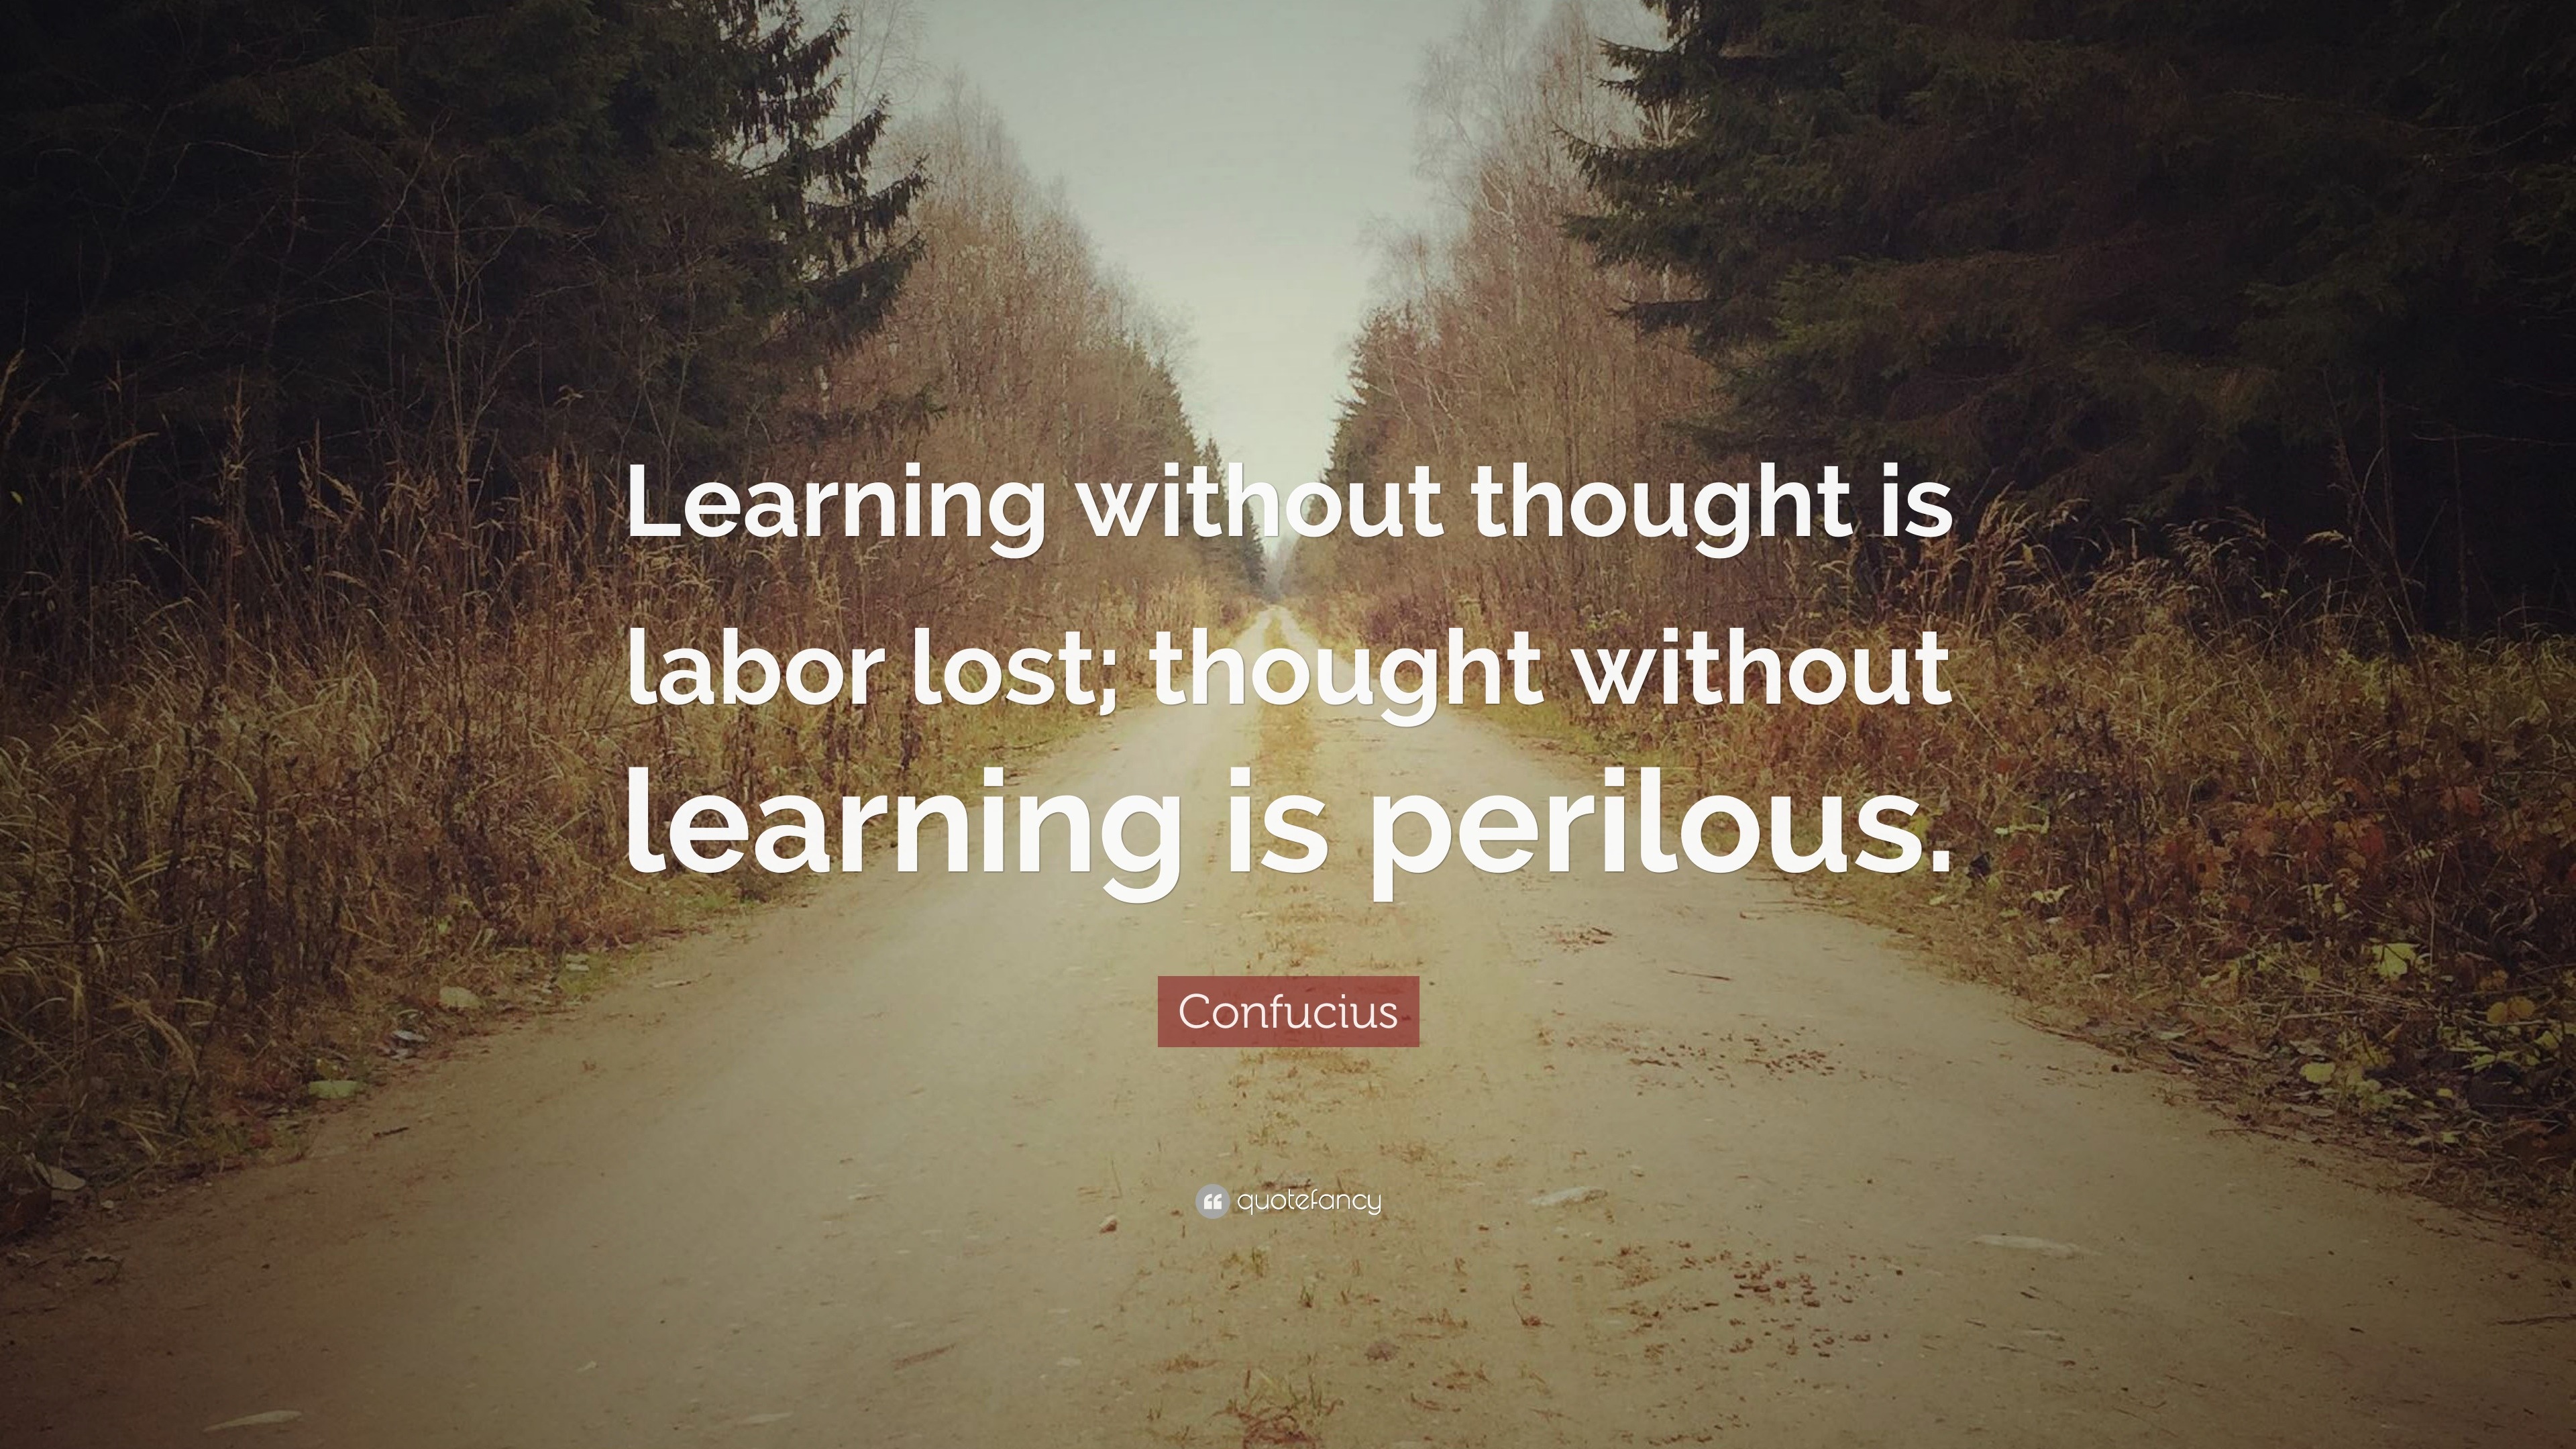 Confucius Quote: “Learning without thought is labor lost; thought